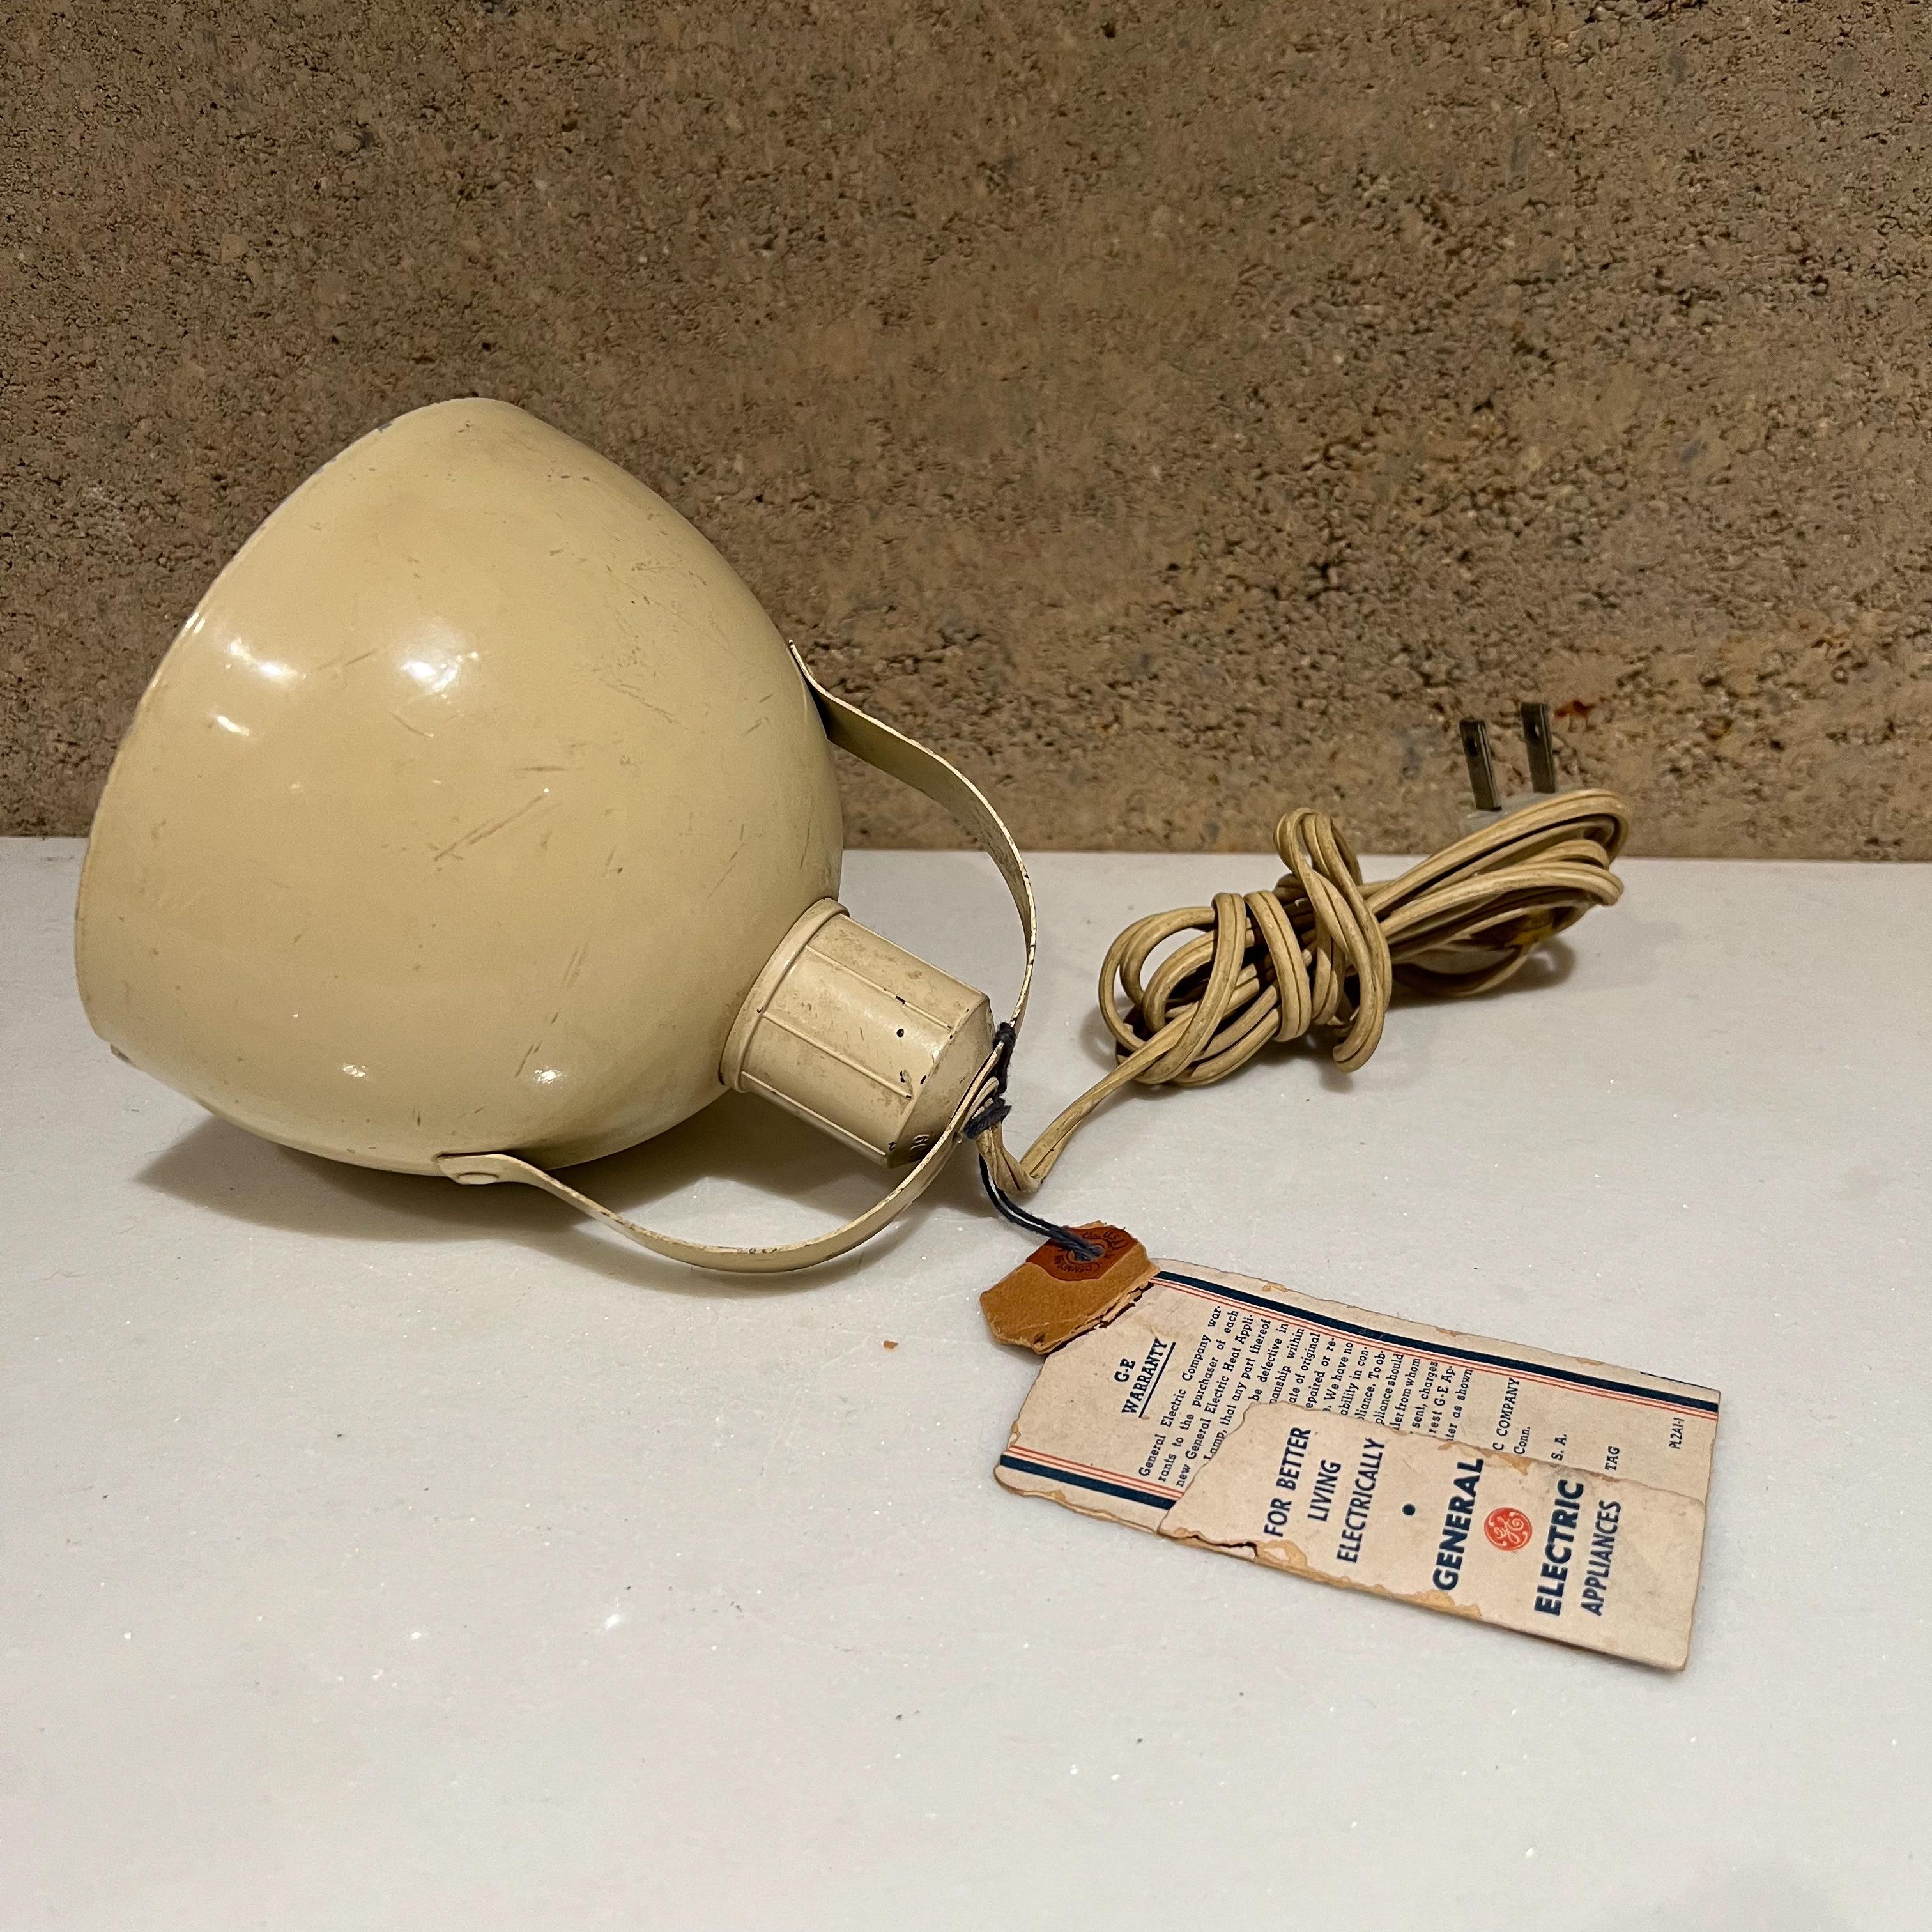 1950s Vintage GE General Electric Therapeutic Heat Applicator Lamp in Beige For Sale 3